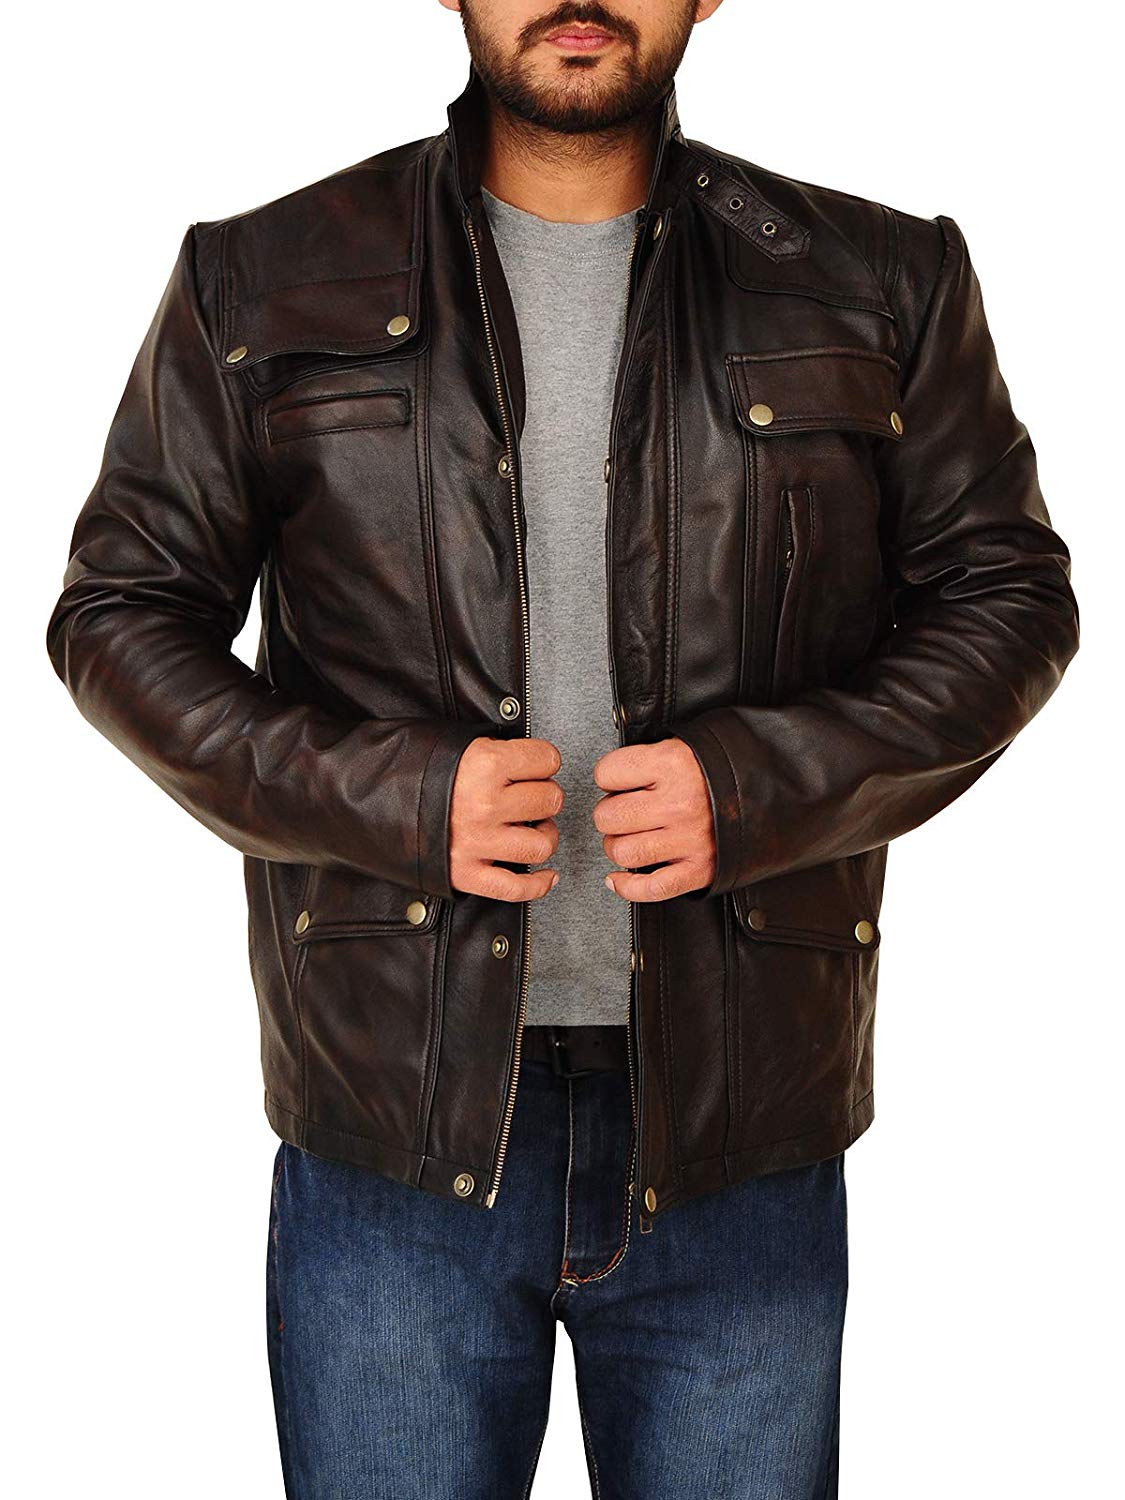 Supernatural Style Distressed Brown Leather Jacket - Right Jackets